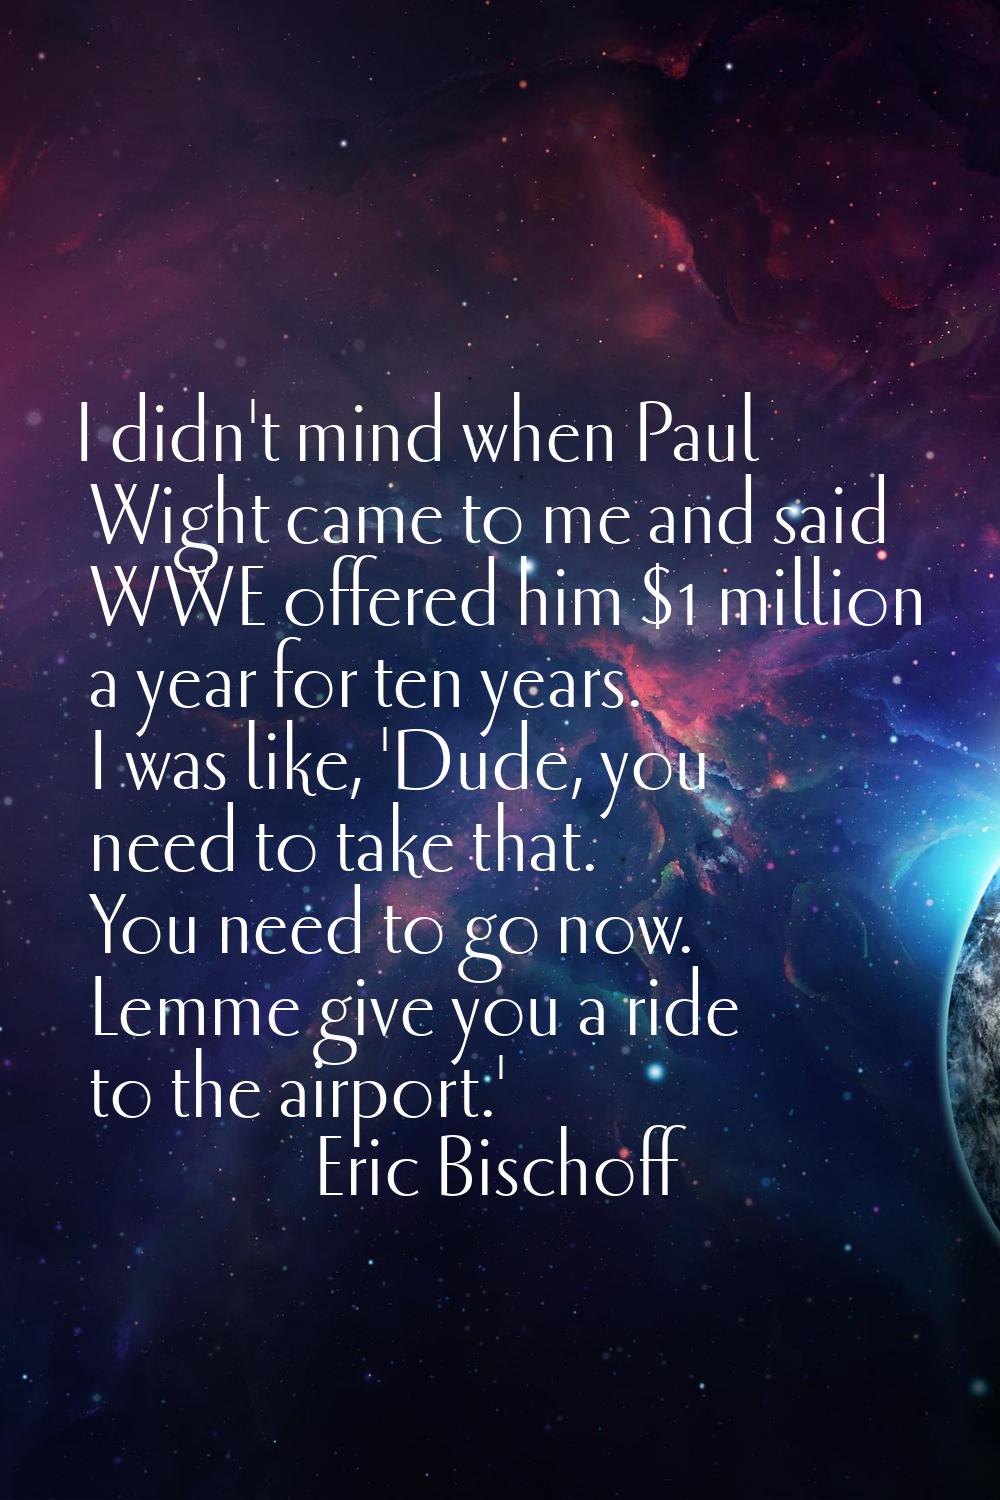 I didn't mind when Paul Wight came to me and said WWE offered him $1 million a year for ten years. 